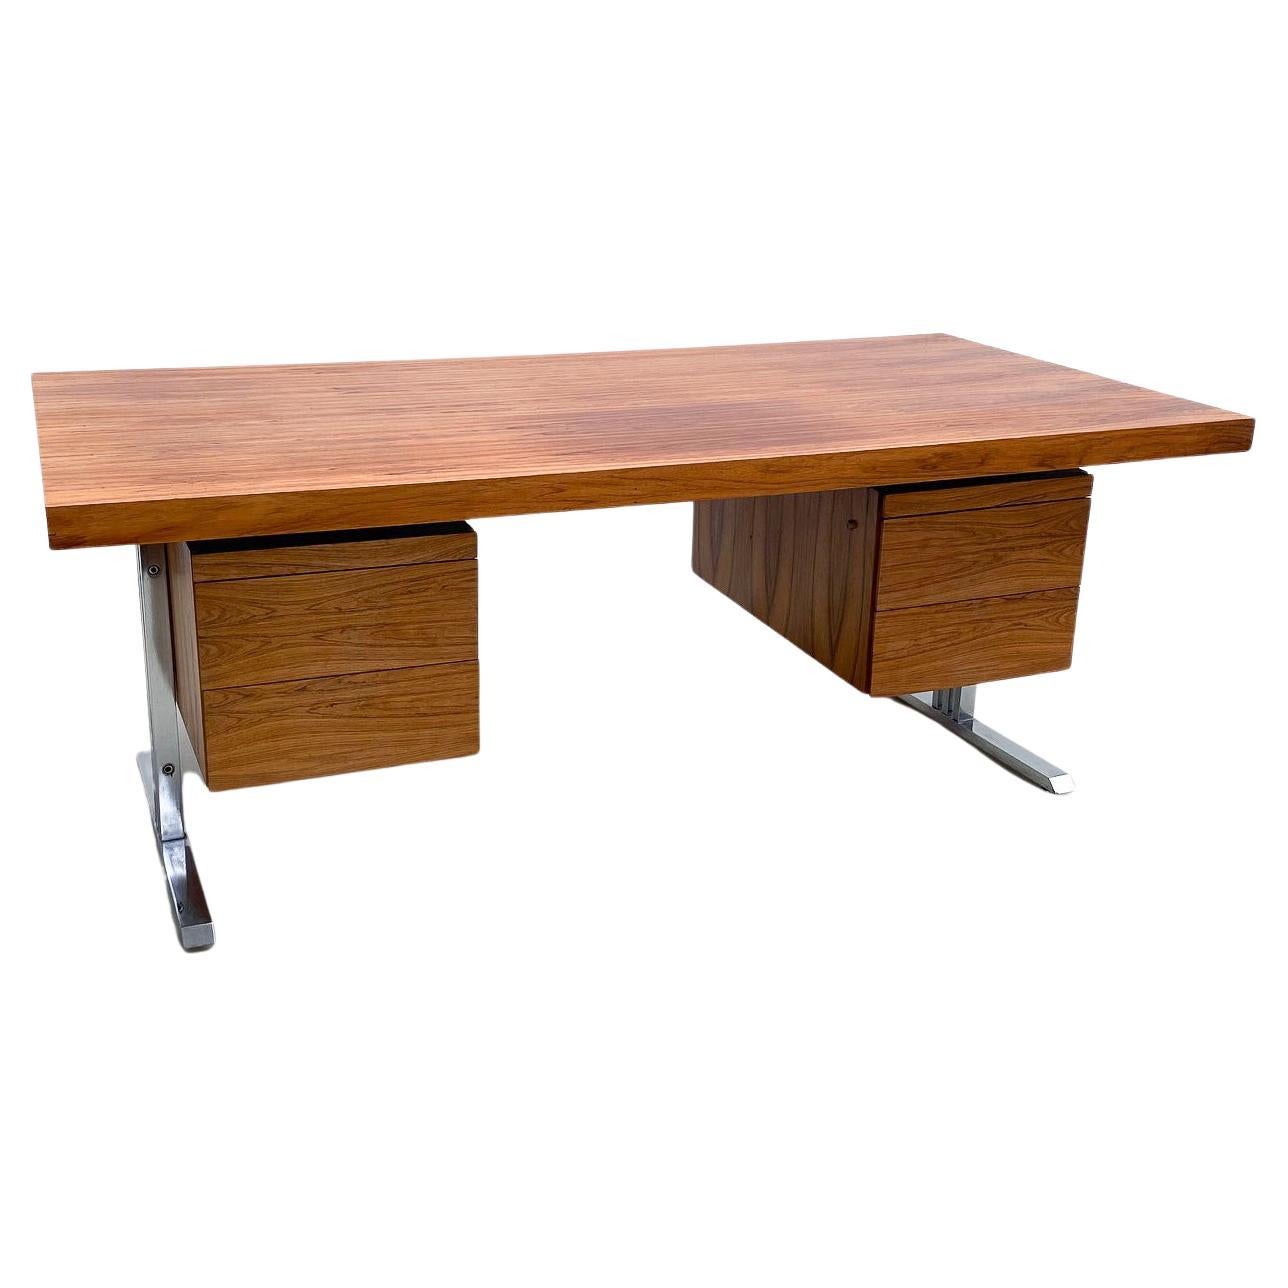 Mid-Century Modern Italian Desk with Drawers , Wood and Chrome, 1970s